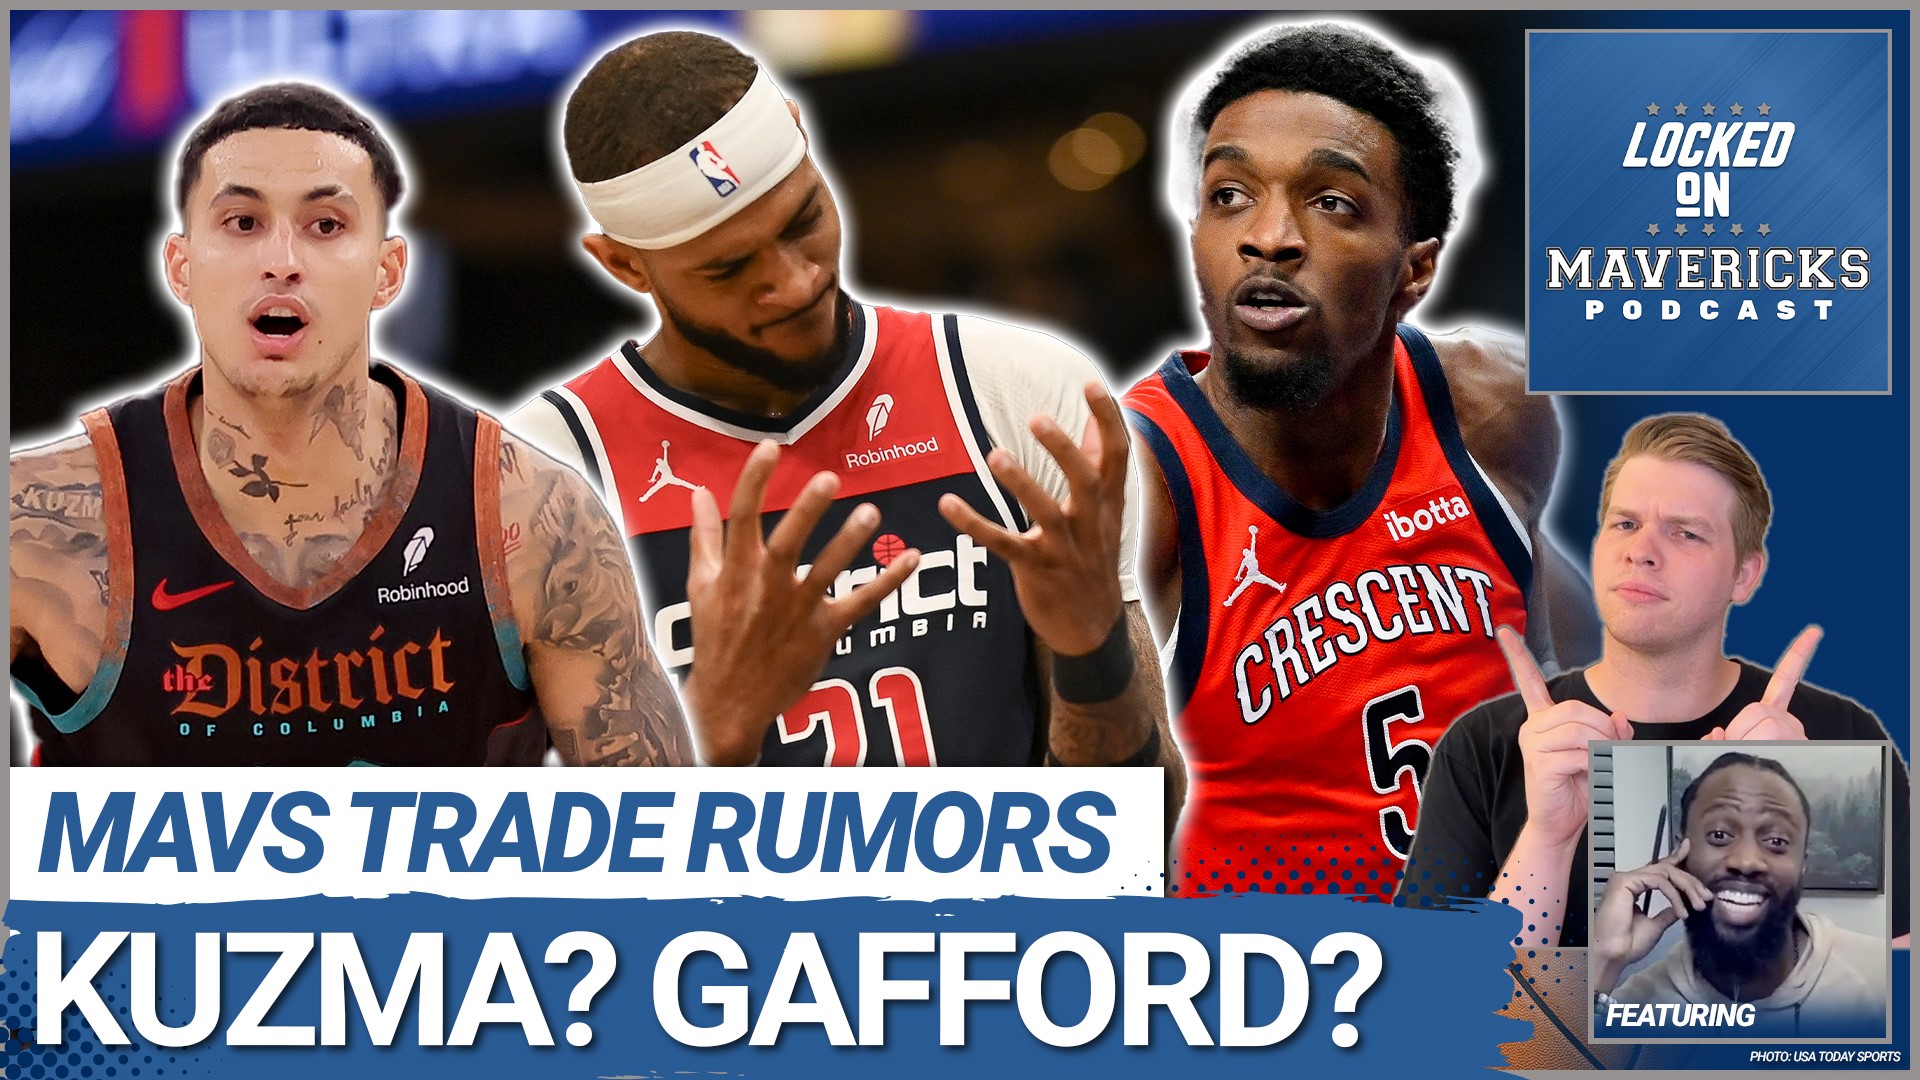 Nick Angstadt & Reggie Adetula discuss all the Mavs Trade Rumors around the Dallas Mavericks and ask if Kyle Kuzma, Daniel Gafford, and Herb Jones are the answer.